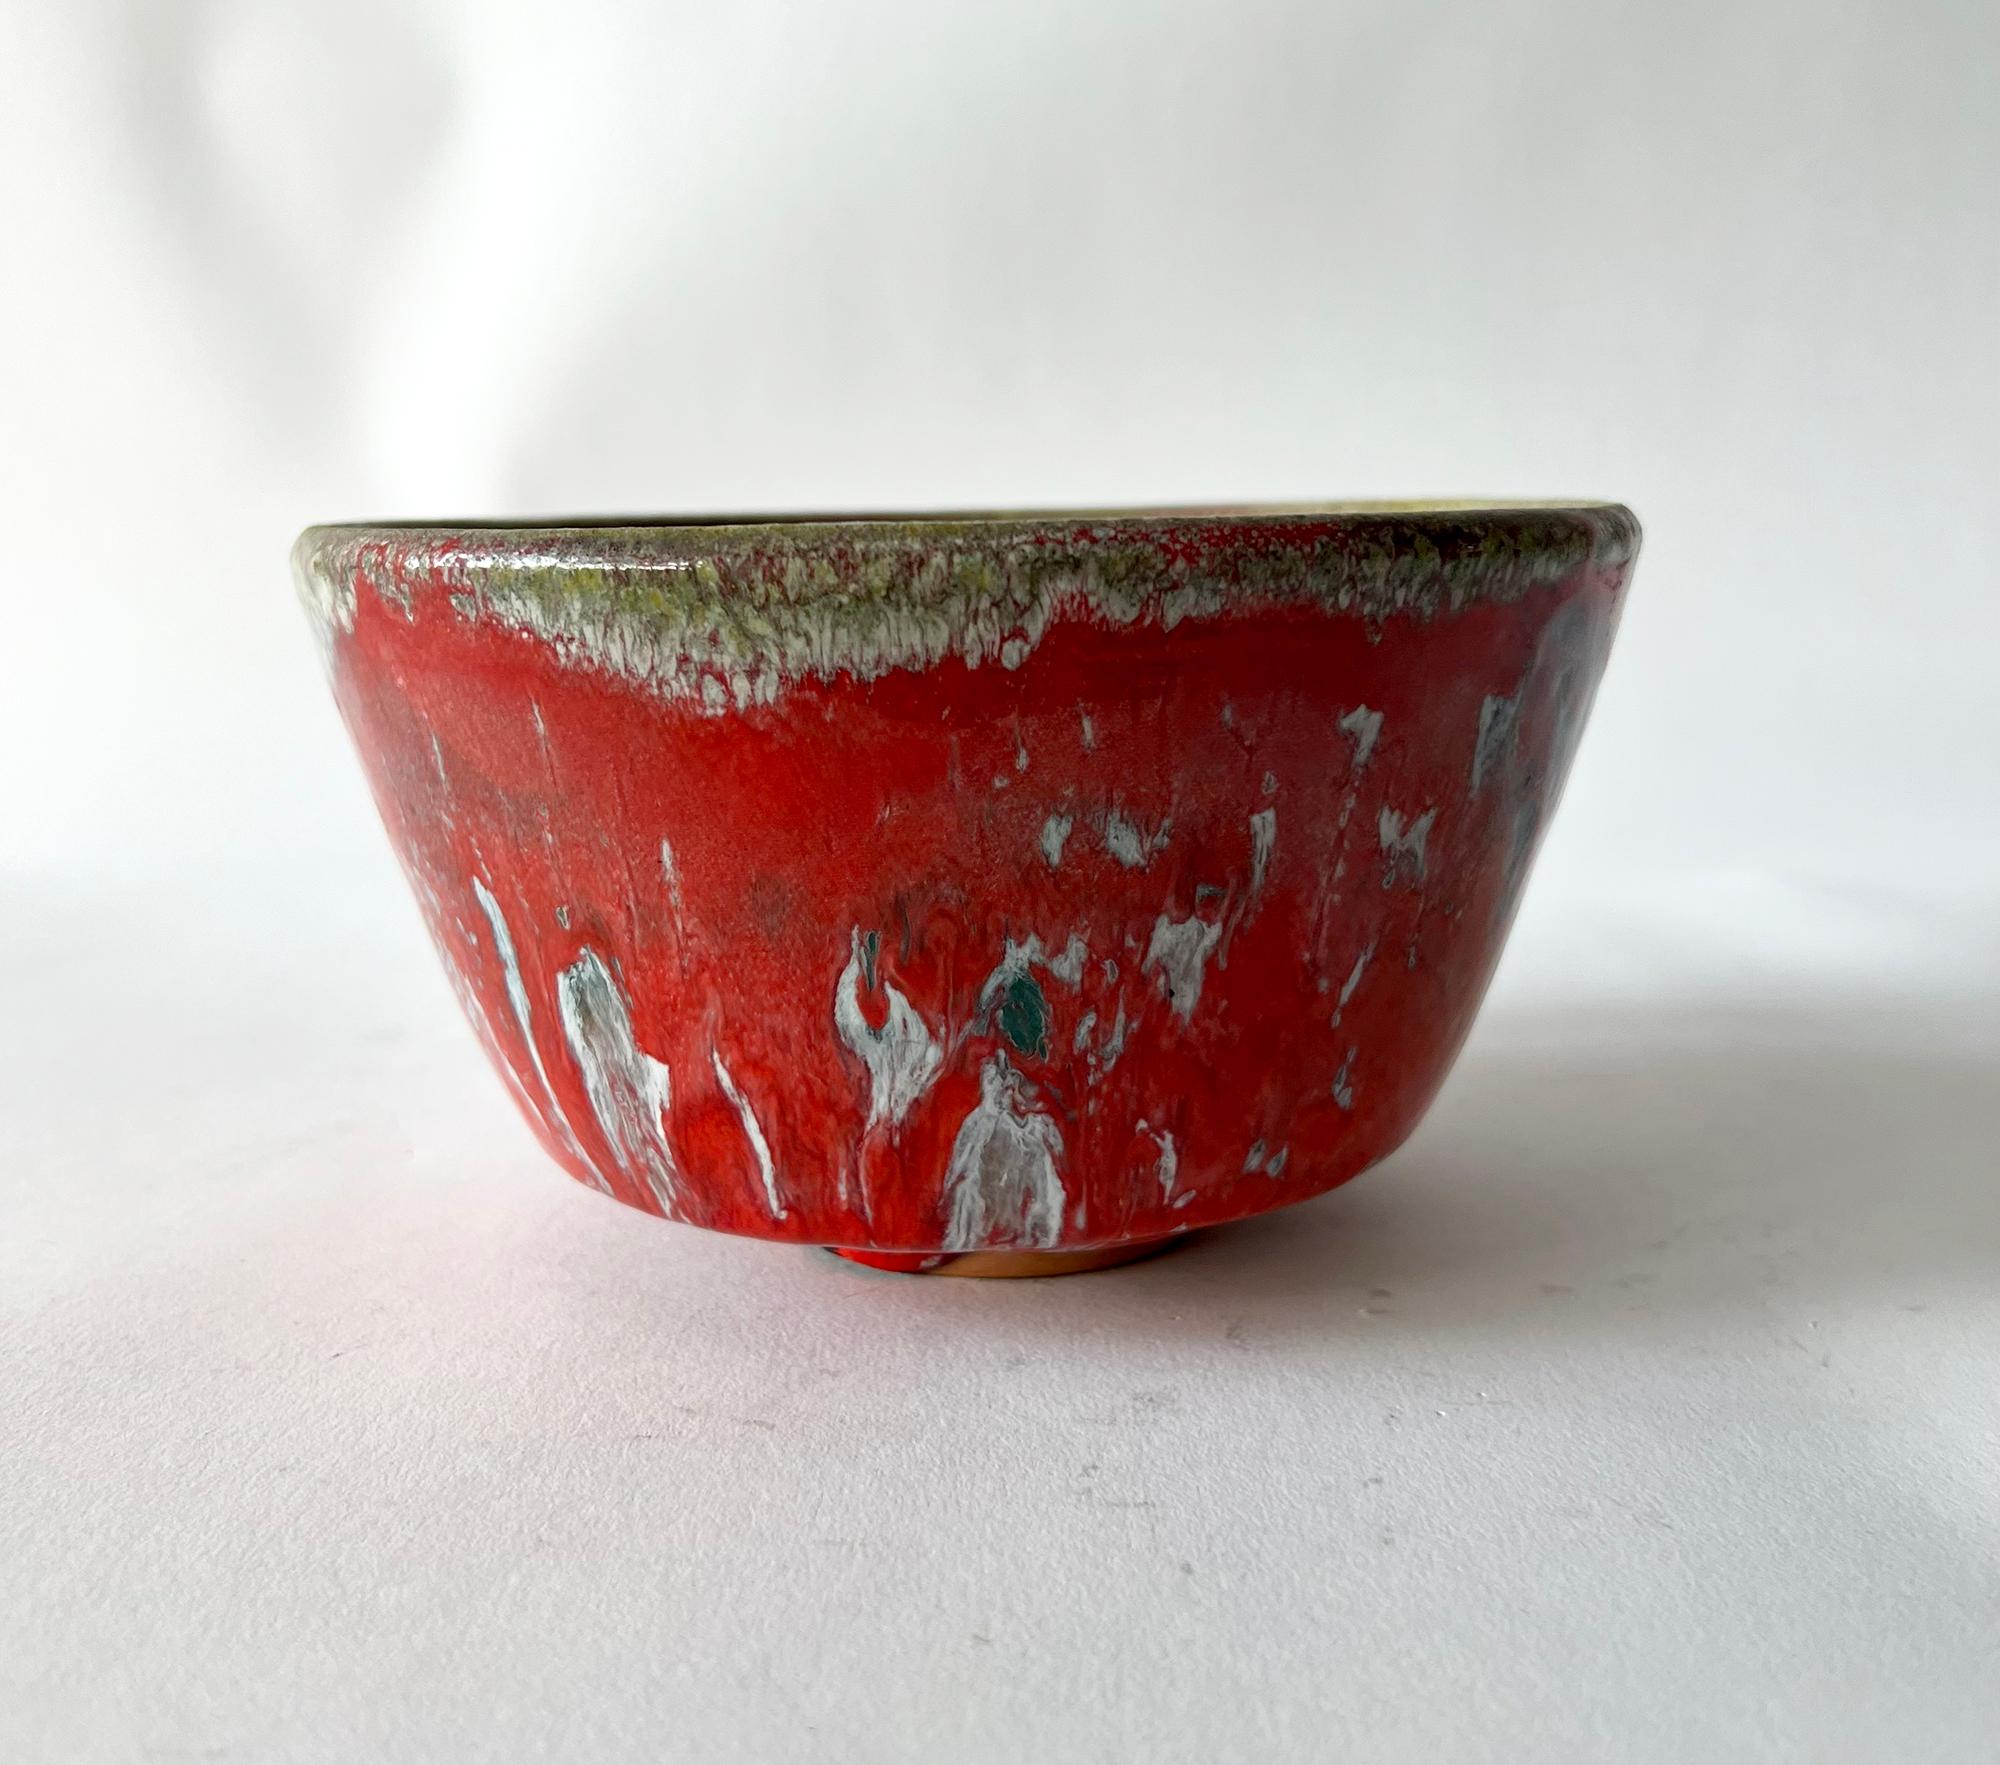 Colorful California studio pottery bowl created by William and Polia Pillin of Los Angeles, California. Bowl measures 3.5